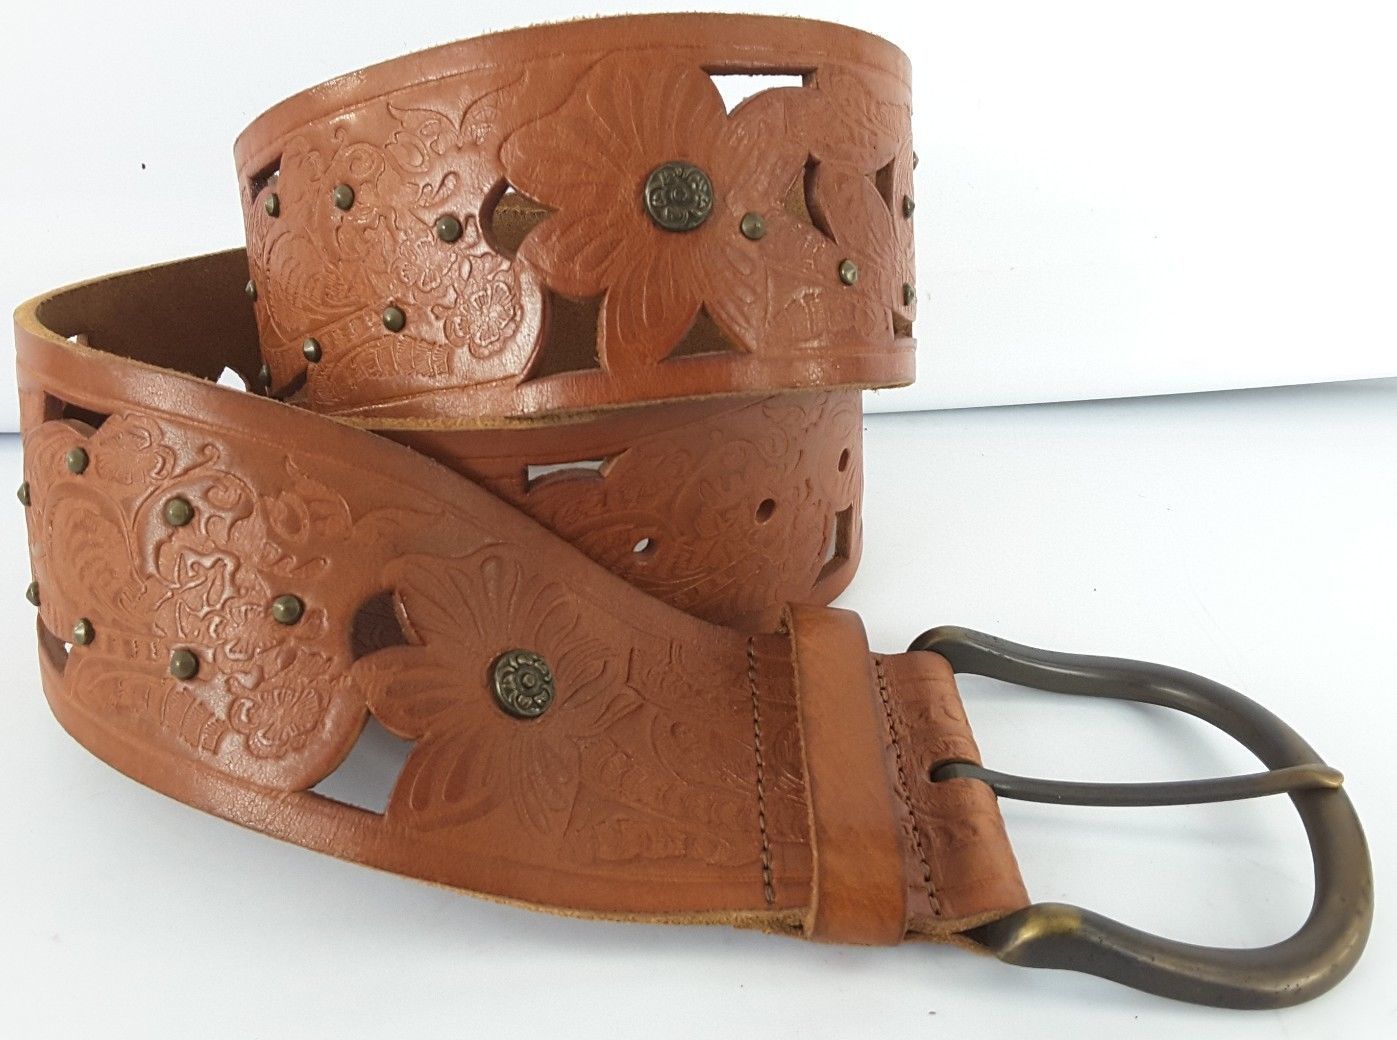 Fossil Womens Tooled Brown Leather Belt Cutouts Floral Size Medium M - Belts